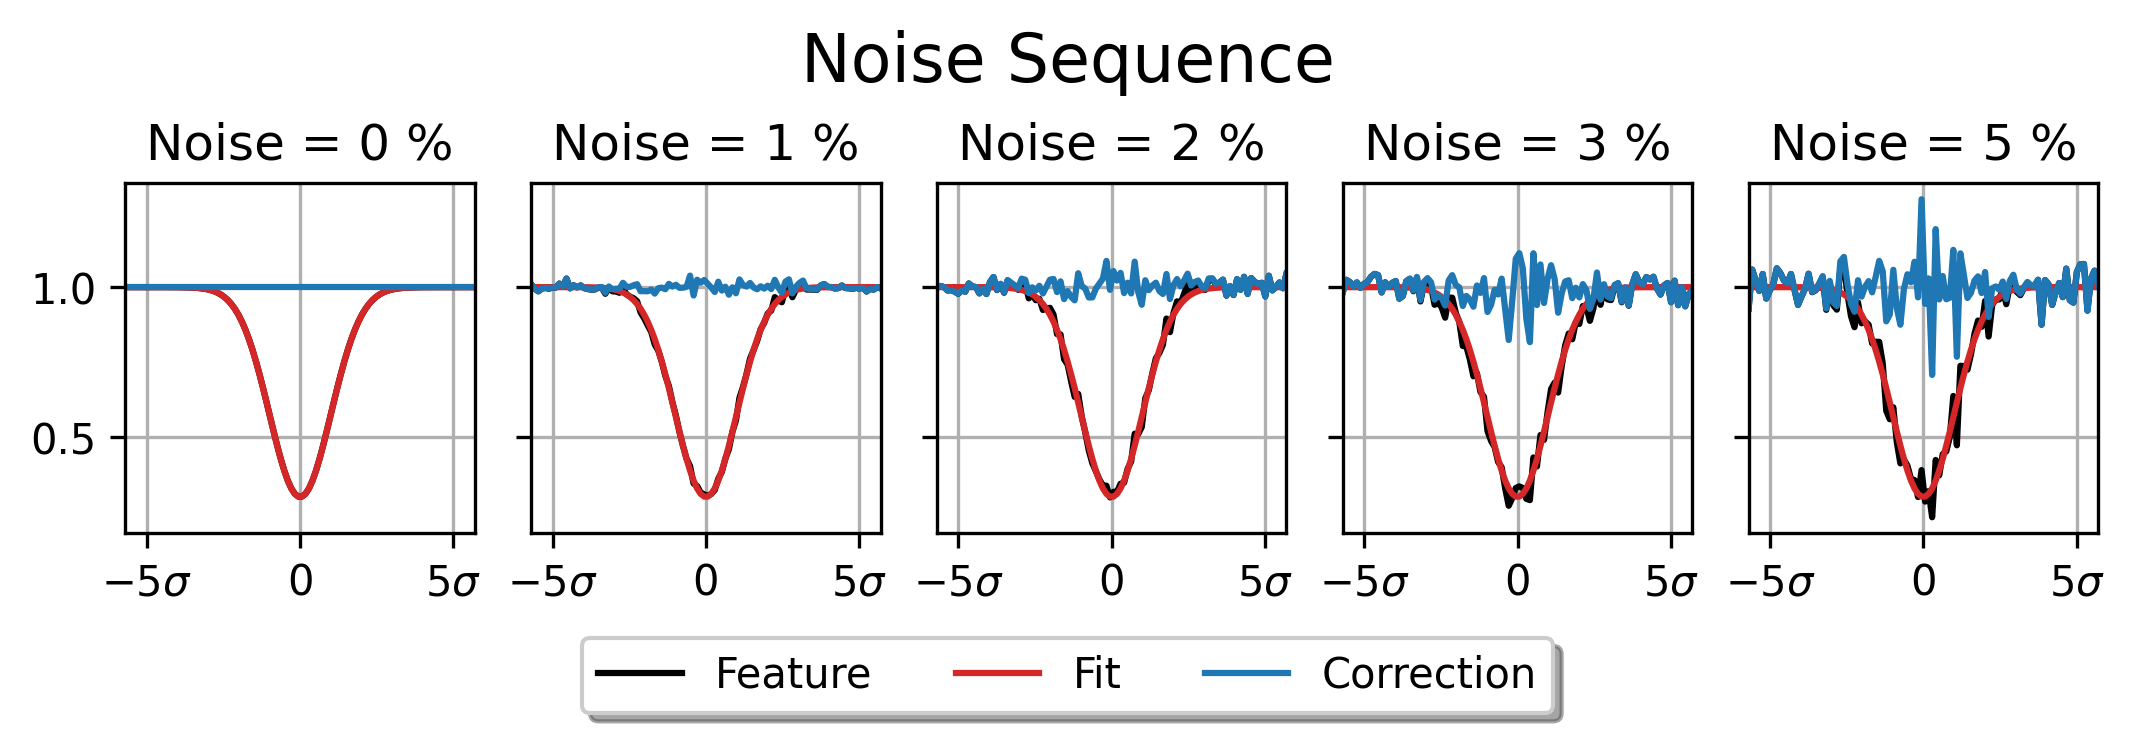 Noise Sequence